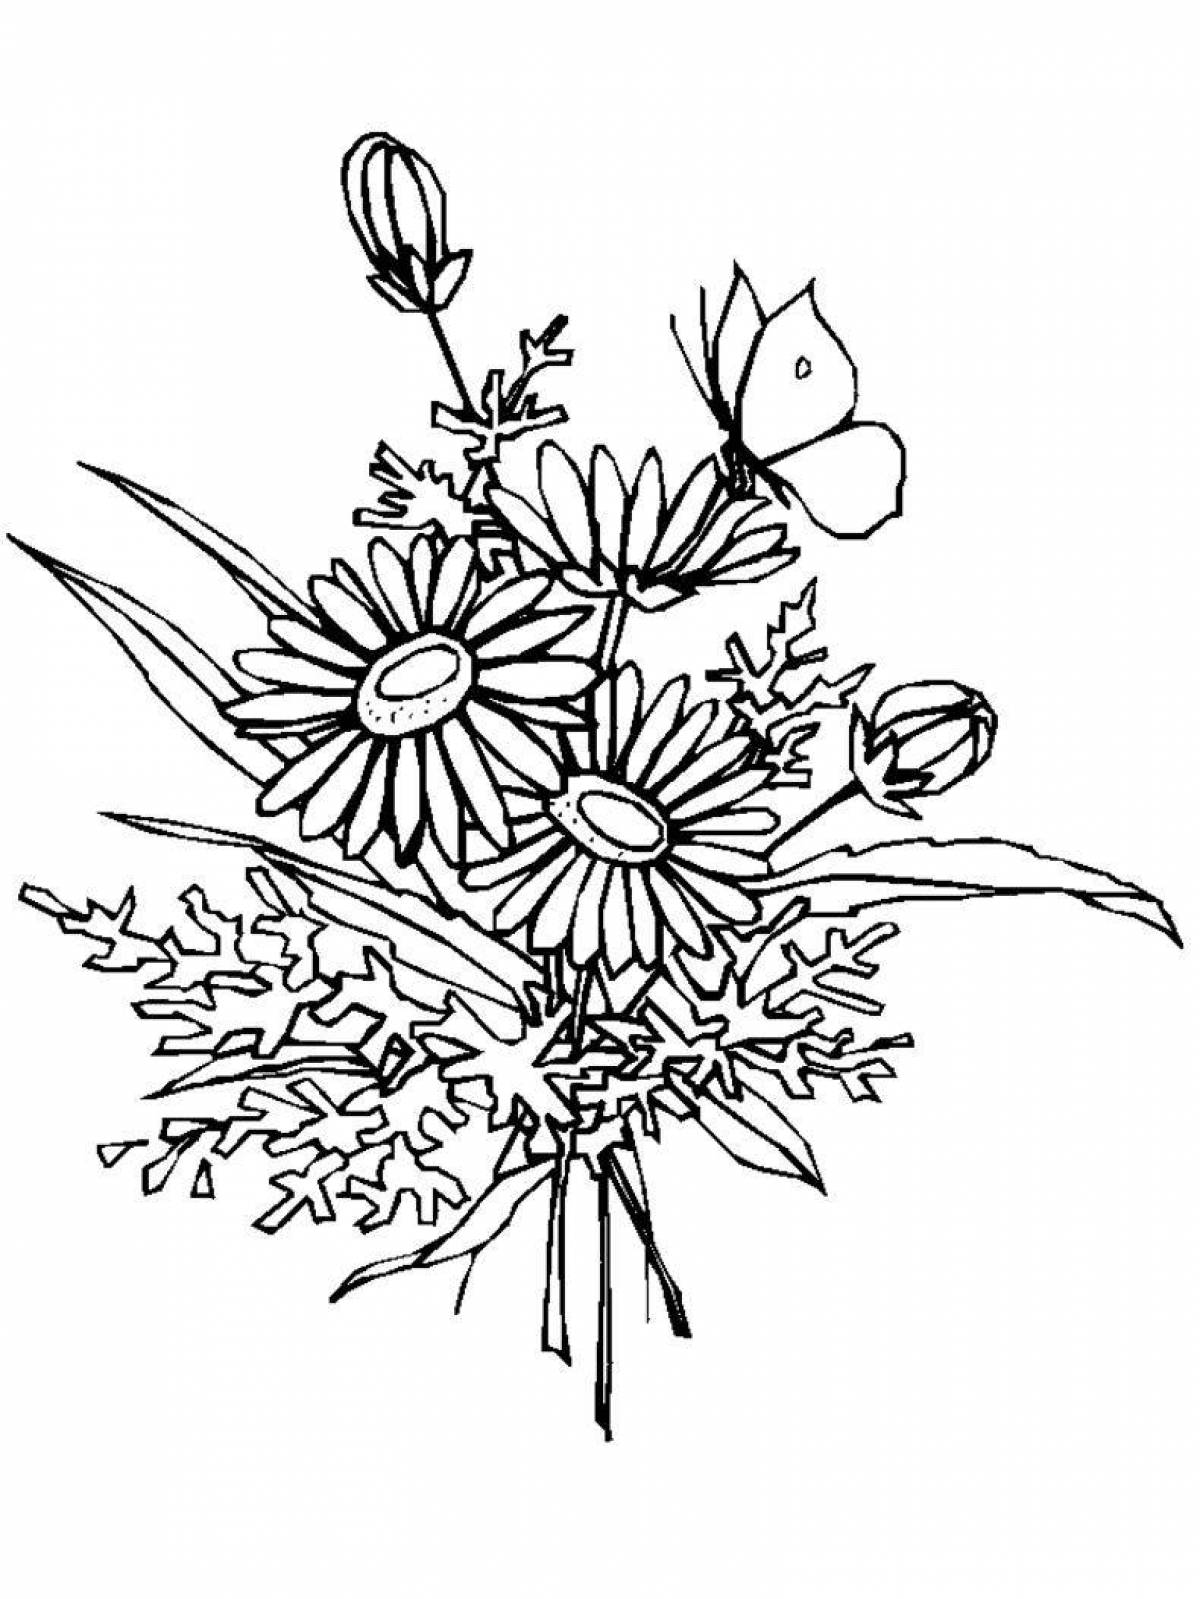 Cute wild flowers coloring pages for kids